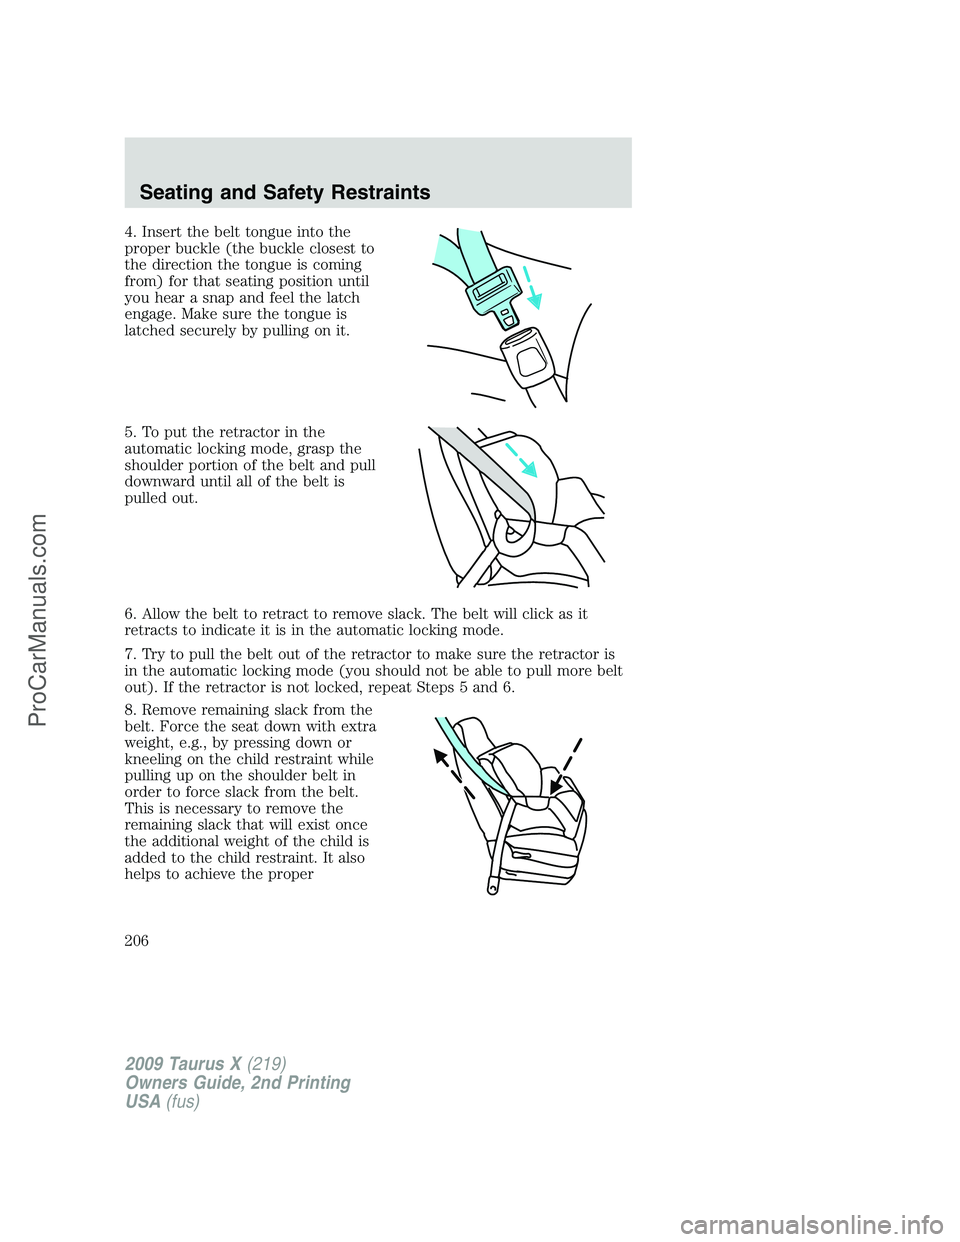 FORD FREESTYLE 2009  Owners Manual 4. Insert the belt tongue into the
proper buckle (the buckle closest to
the direction the tongue is coming
from) for that seating position until
you hear a snap and feel the latch
engage. Make sure th